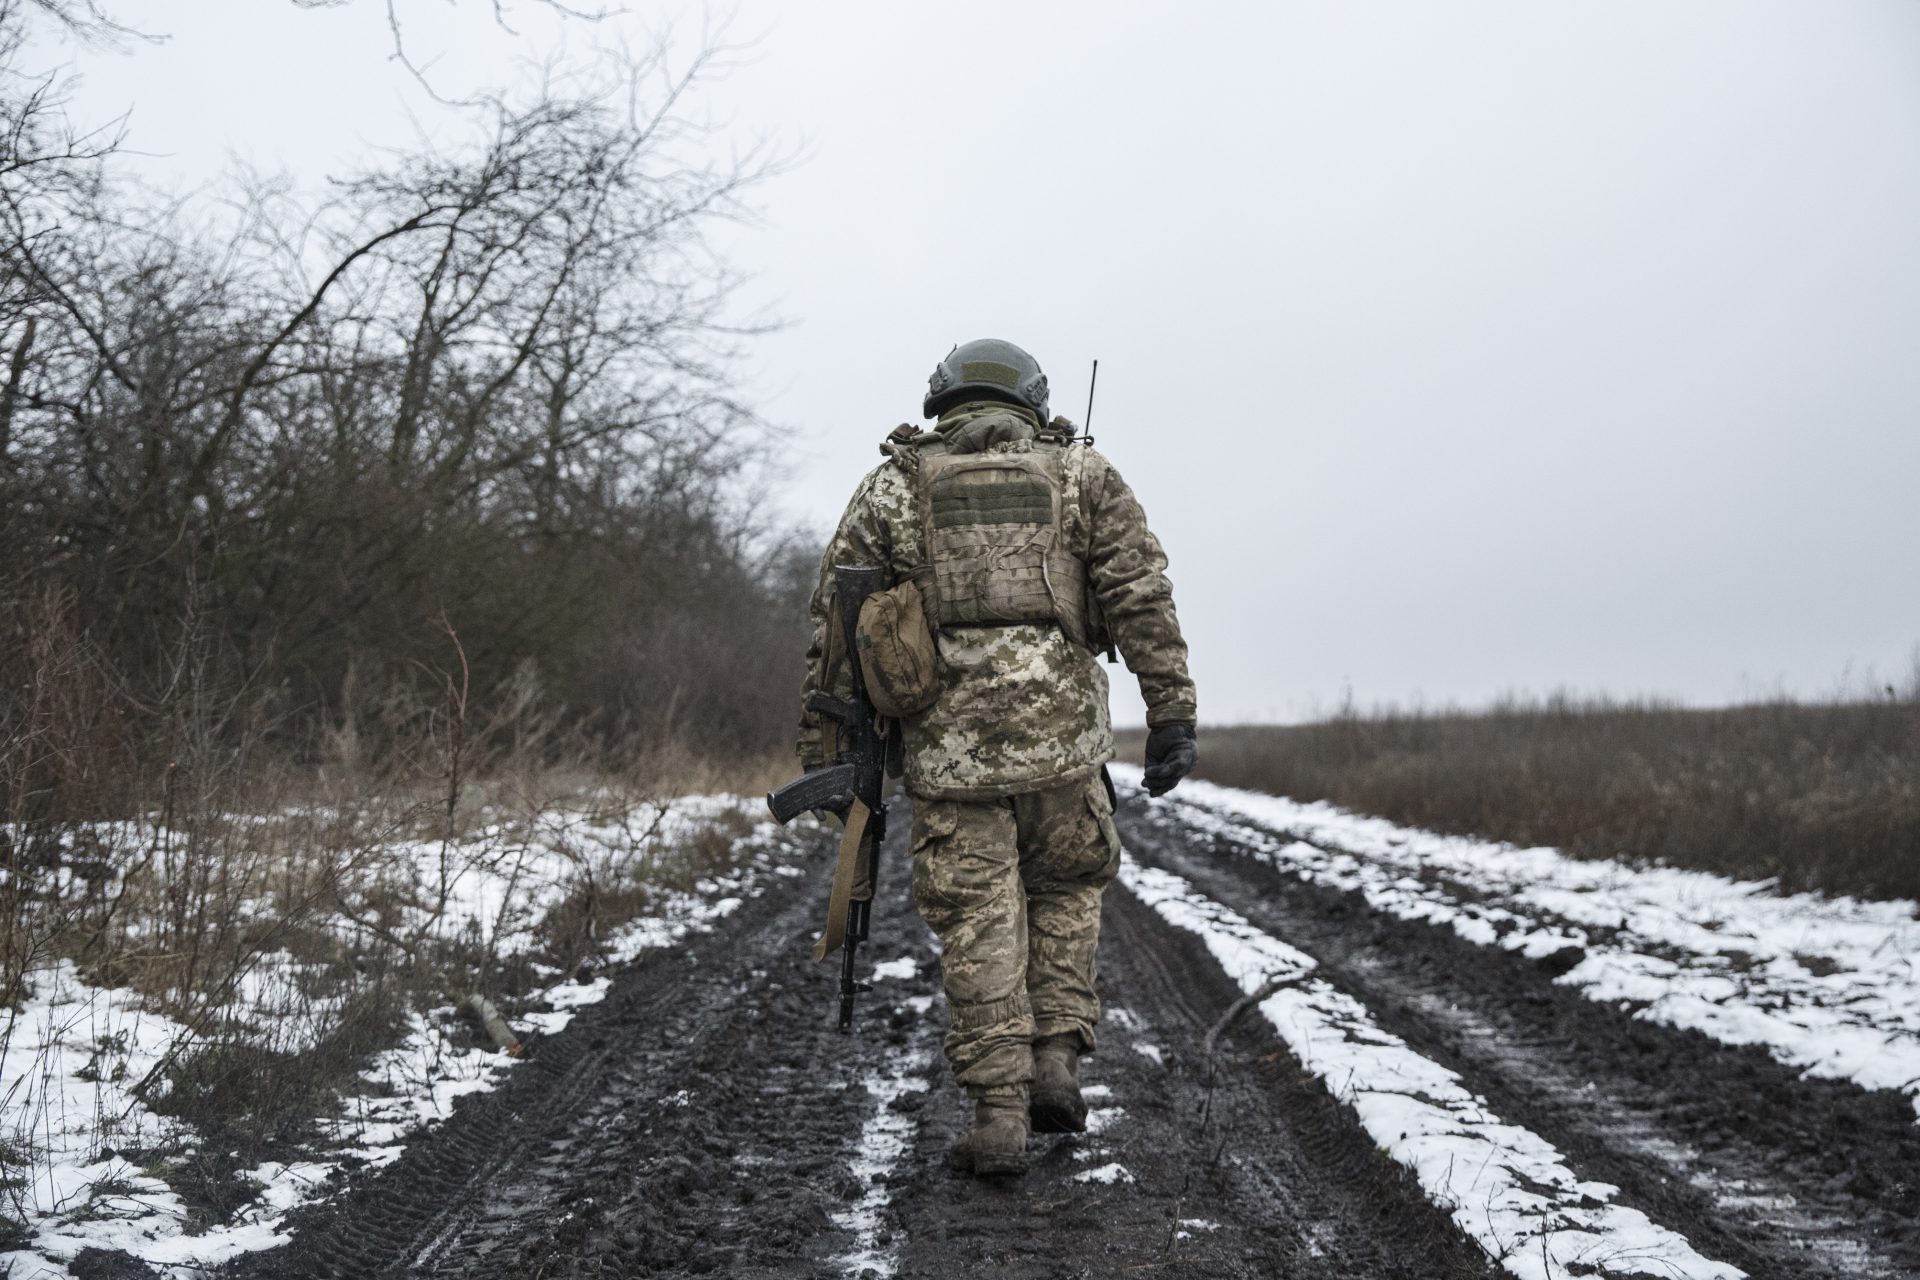 Ukraine has deployed a new strategy to beat Russia